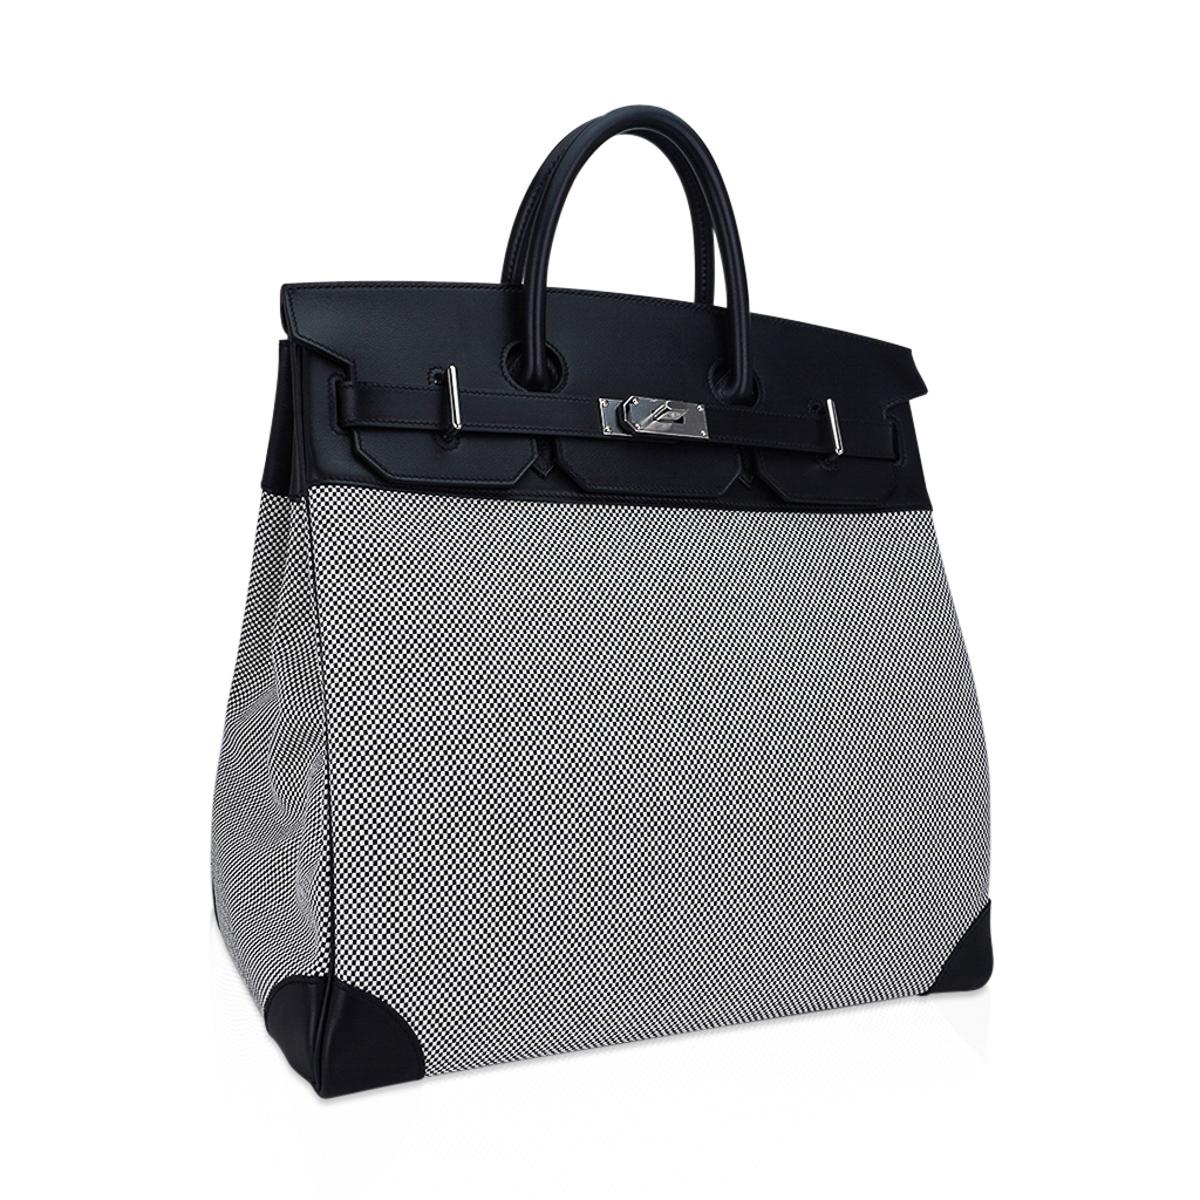 Mightychic offers a rare Hermes HAC 40 bag featured in Black with crisp Black and White Criss Cross Toile. 
Black Evercolor leather is accentuated with palladium hardware.
A chic and masculine combination for this rare Hermes classic bag.
This